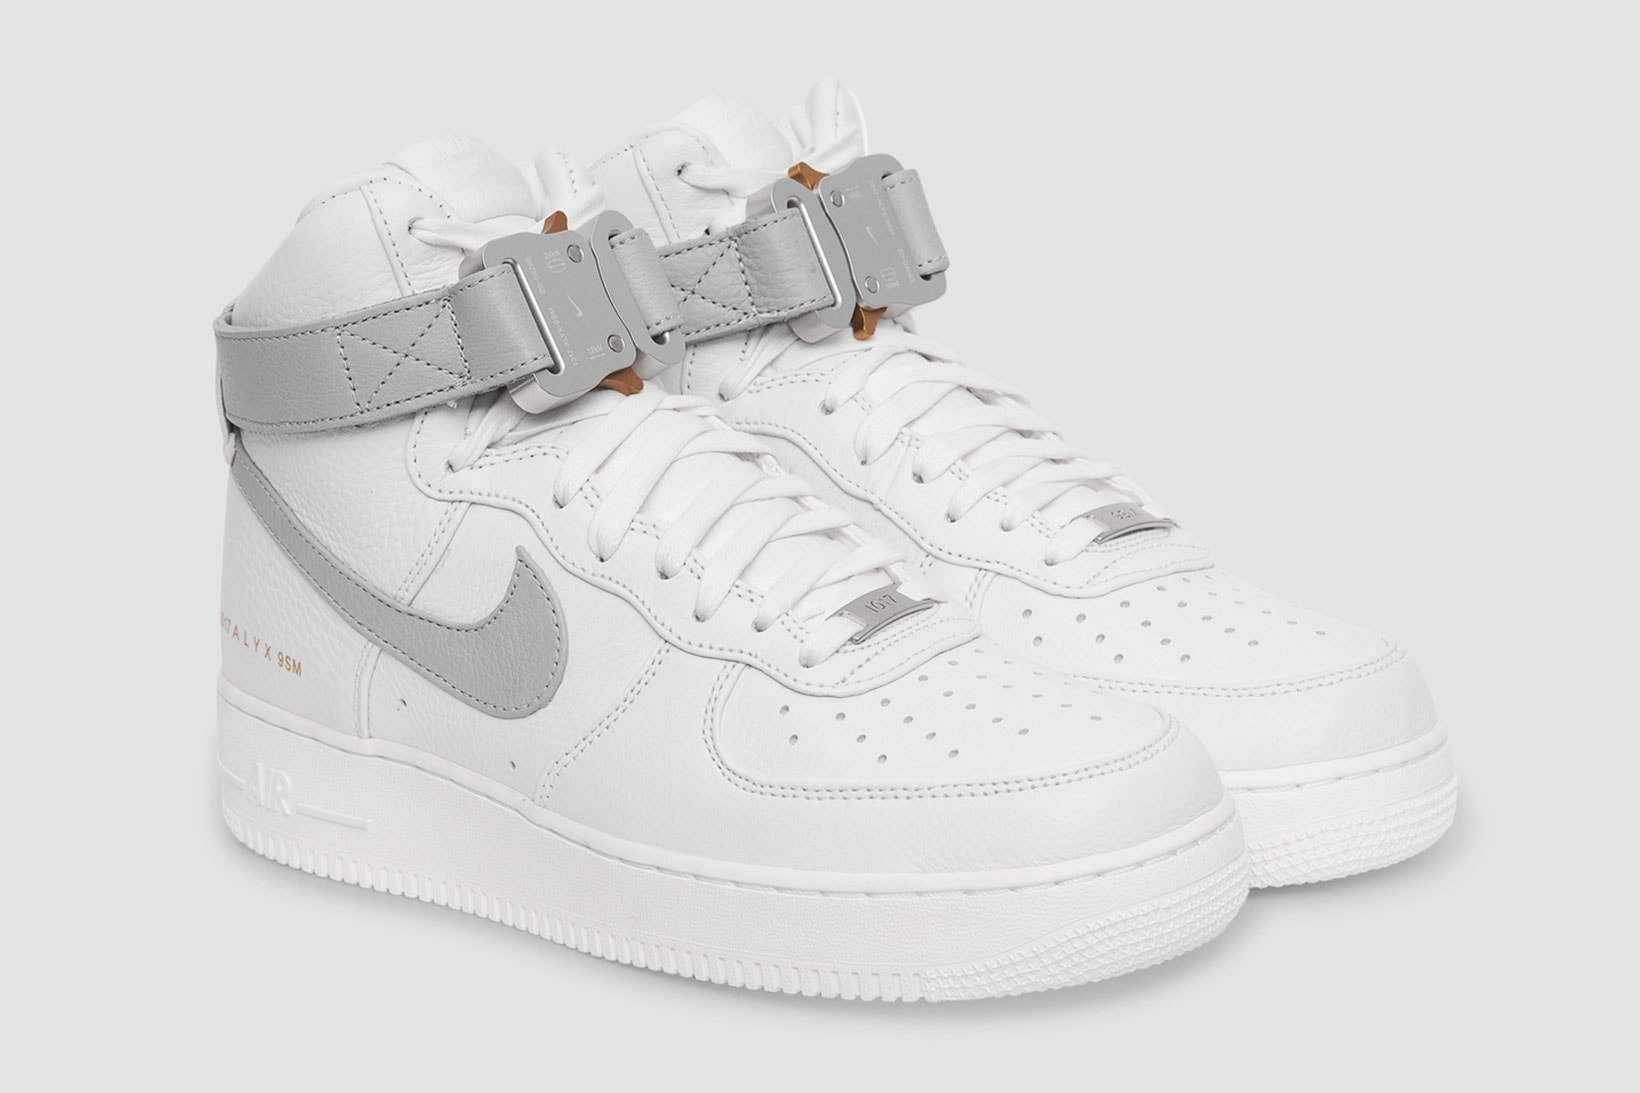 1017 alyx 9sm nike air force 1 af1 white gray official look rollercoaster buckle